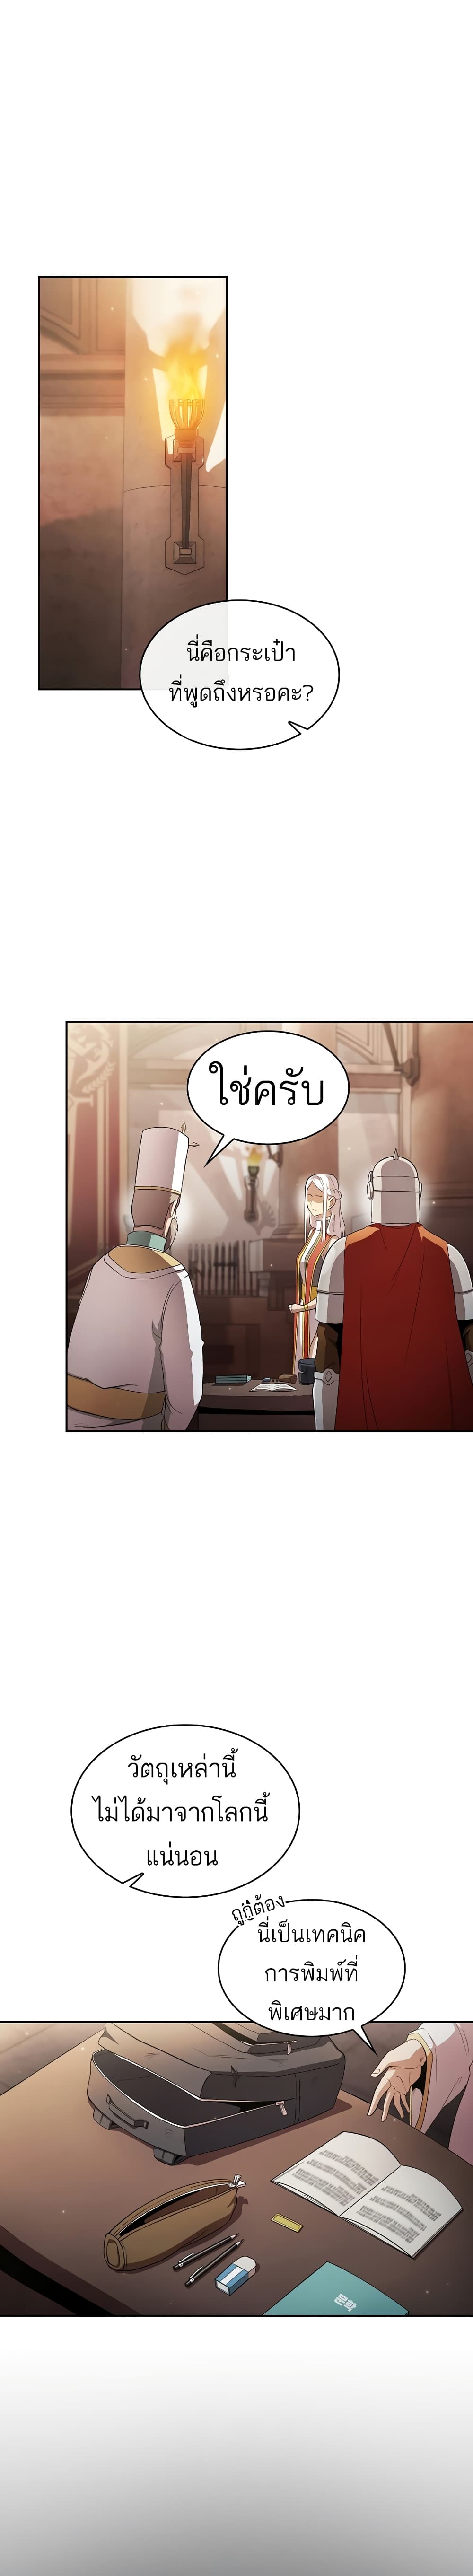 Is This Hero for Real à¸à¸­à¸à¸à¸µà¹ 33 (2)